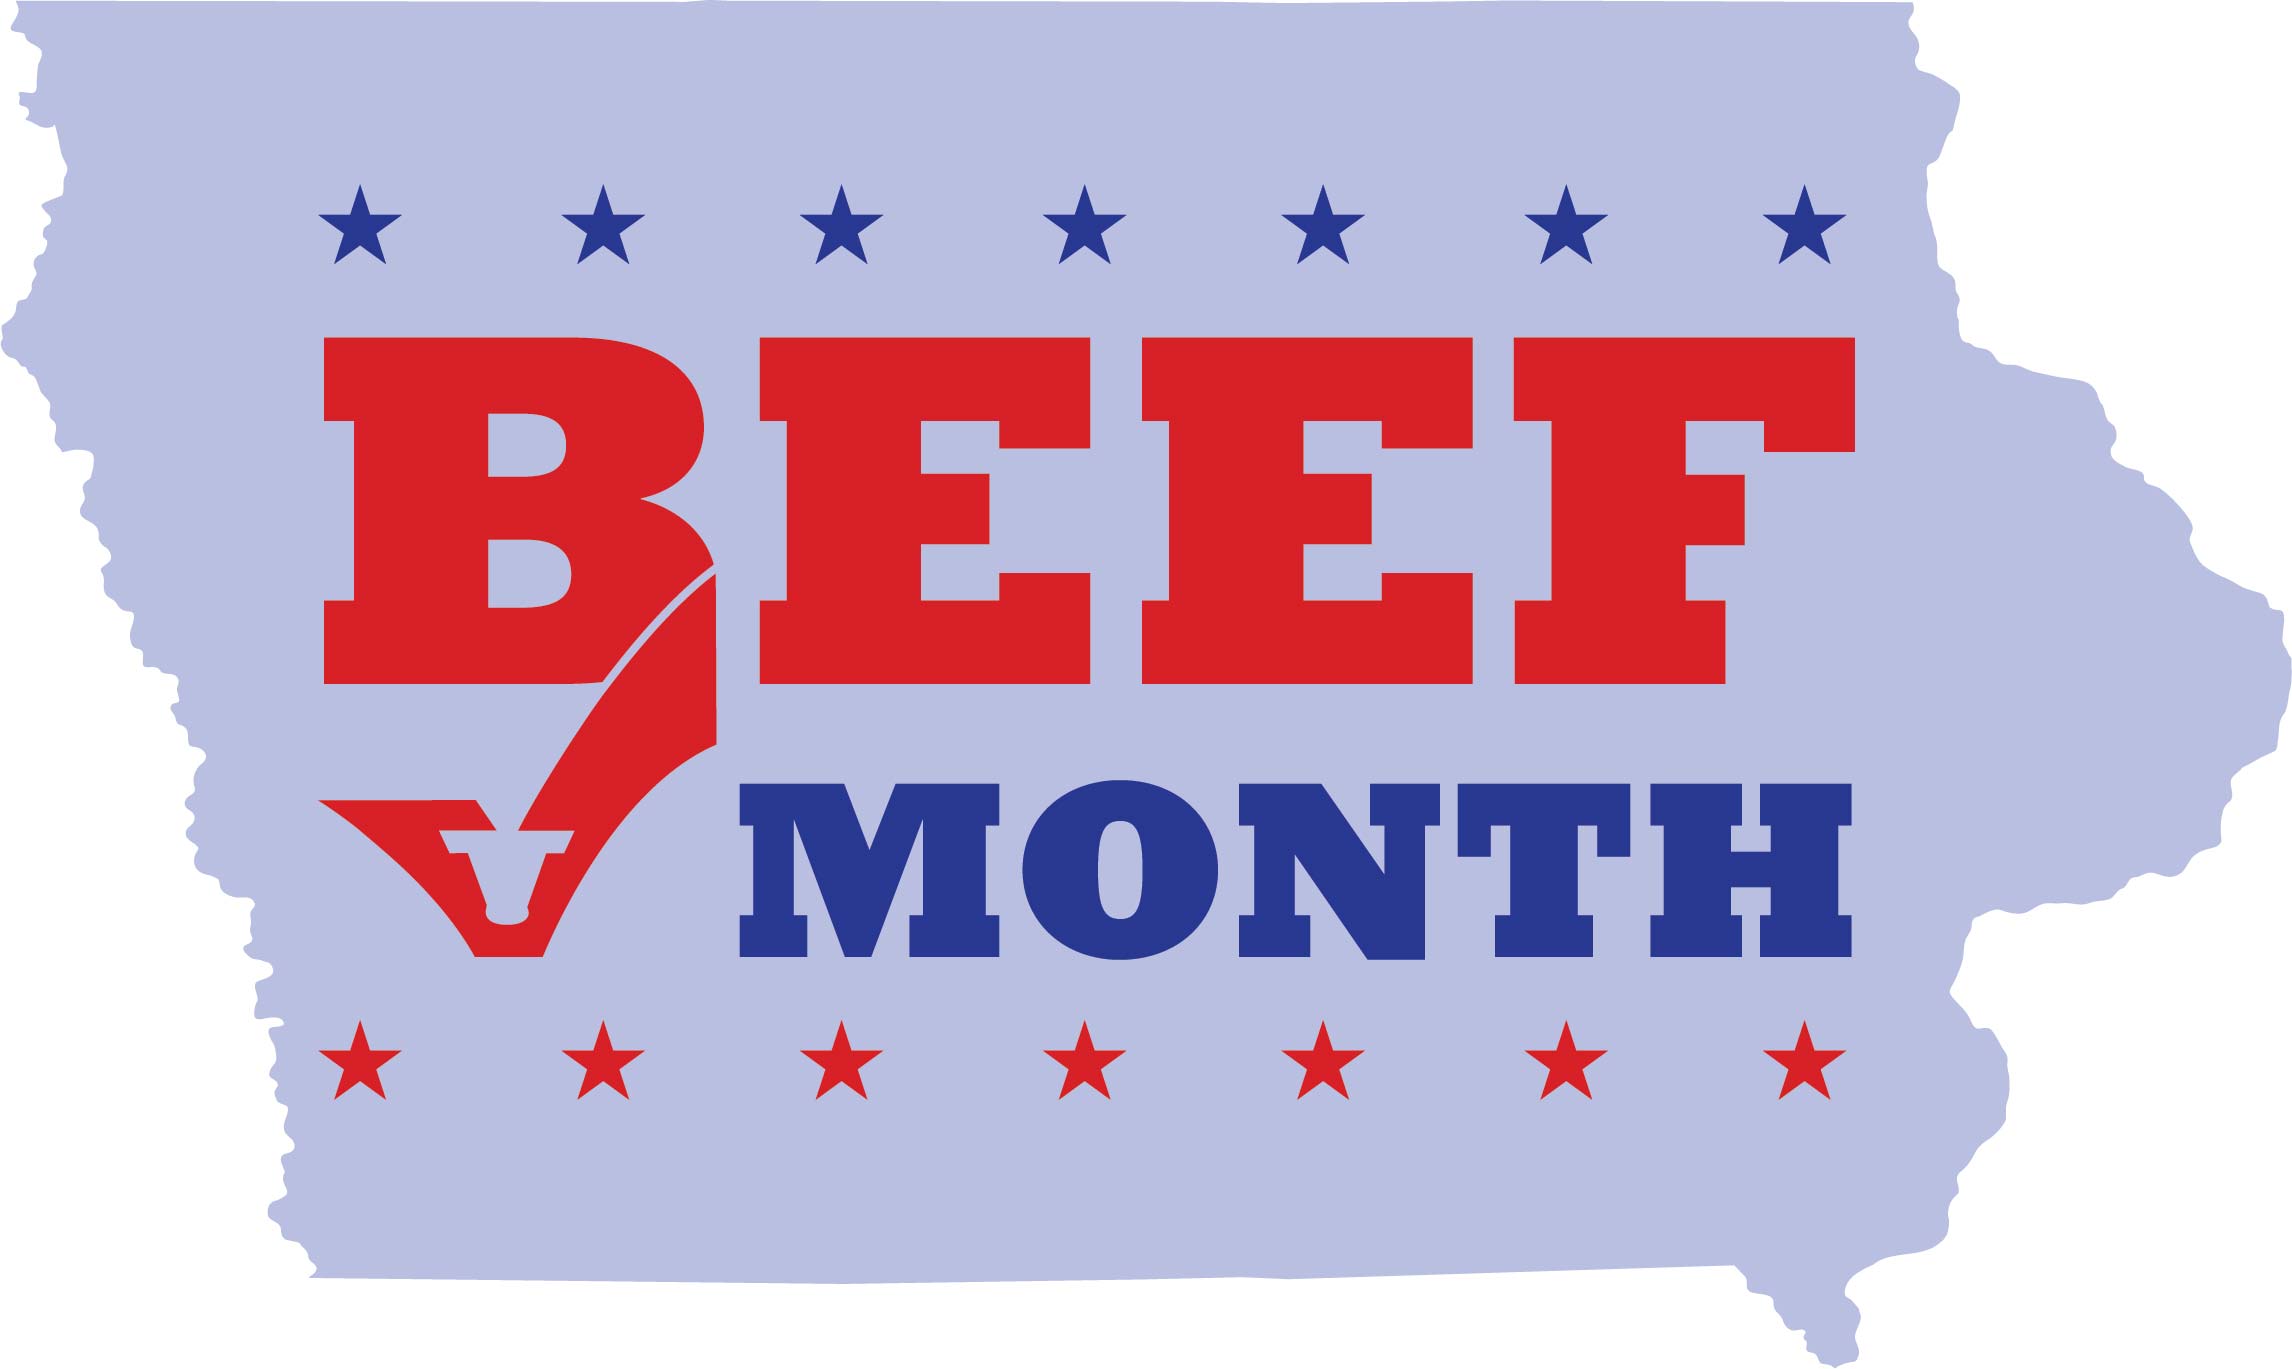 May is Beef Month in Iowa